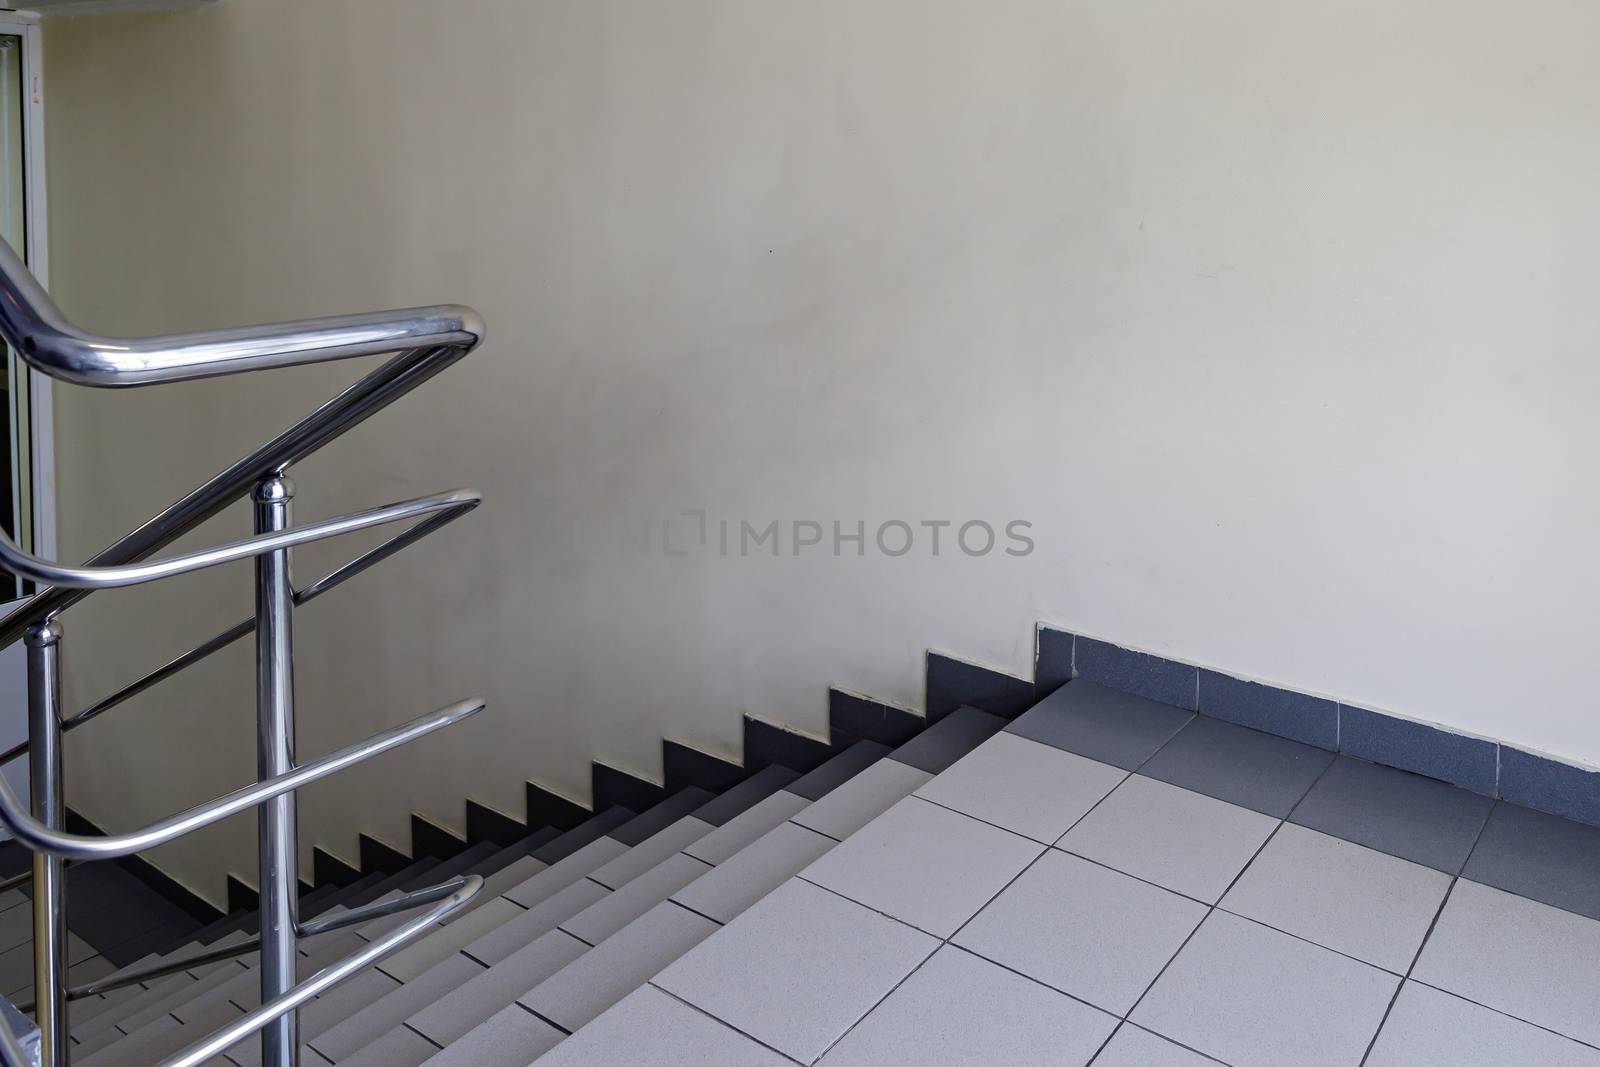 The concept of the interior of an urban building. Photo of a staircase with metal railing between floors.